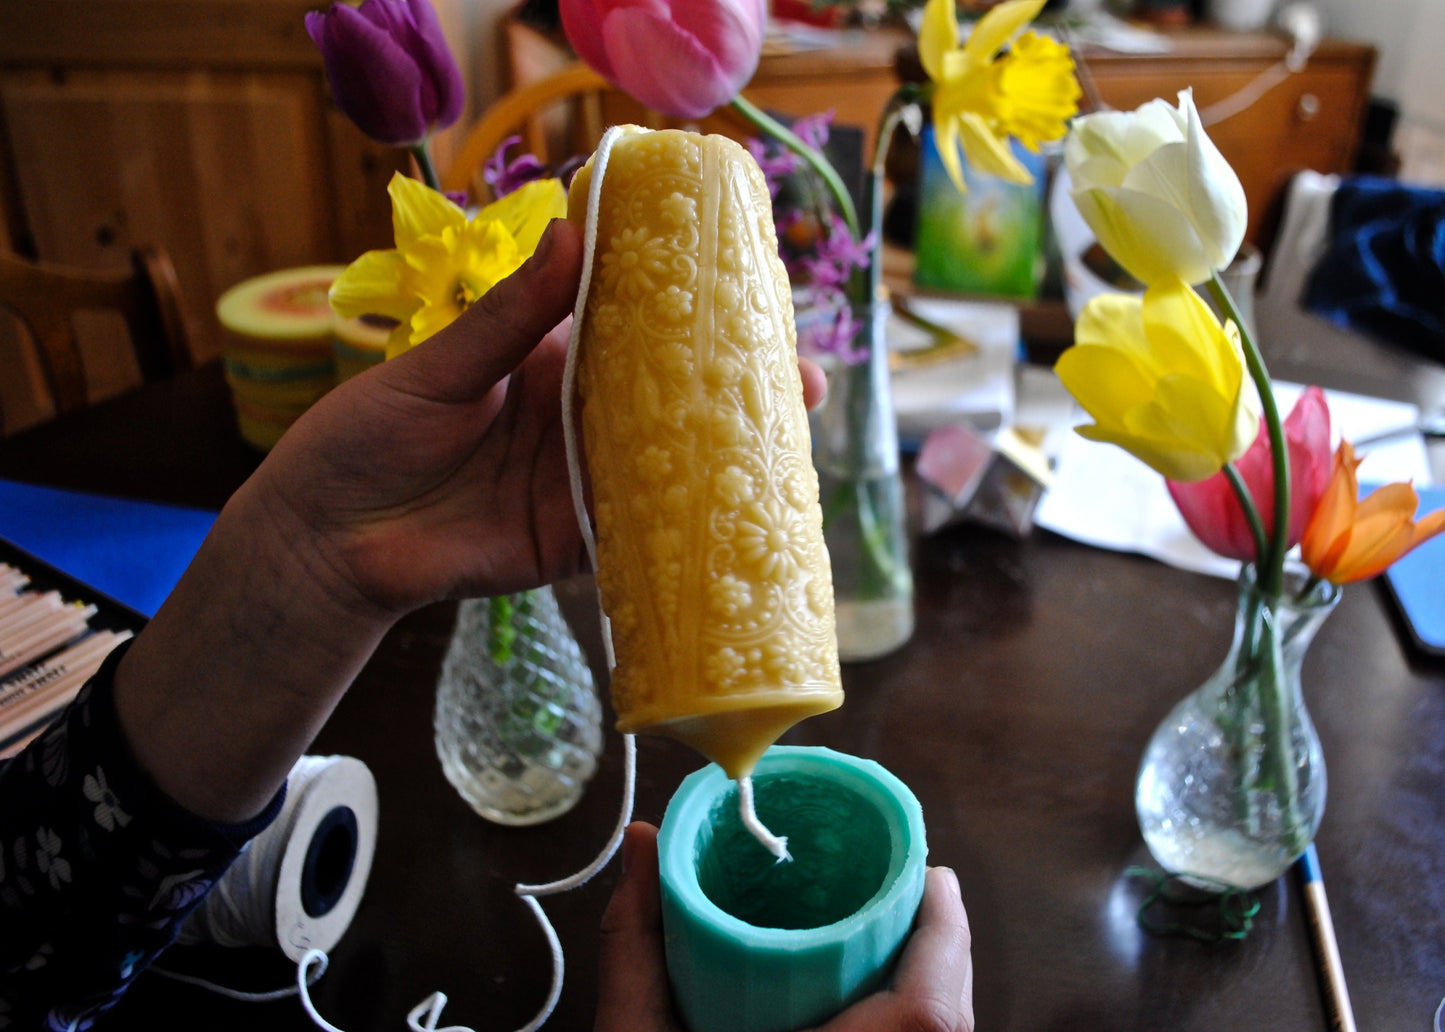 1800s Flower Pillar in Pure Beeswax // Pillar Candle Cast from Actual Candle from 1800s / Beeswax Candle